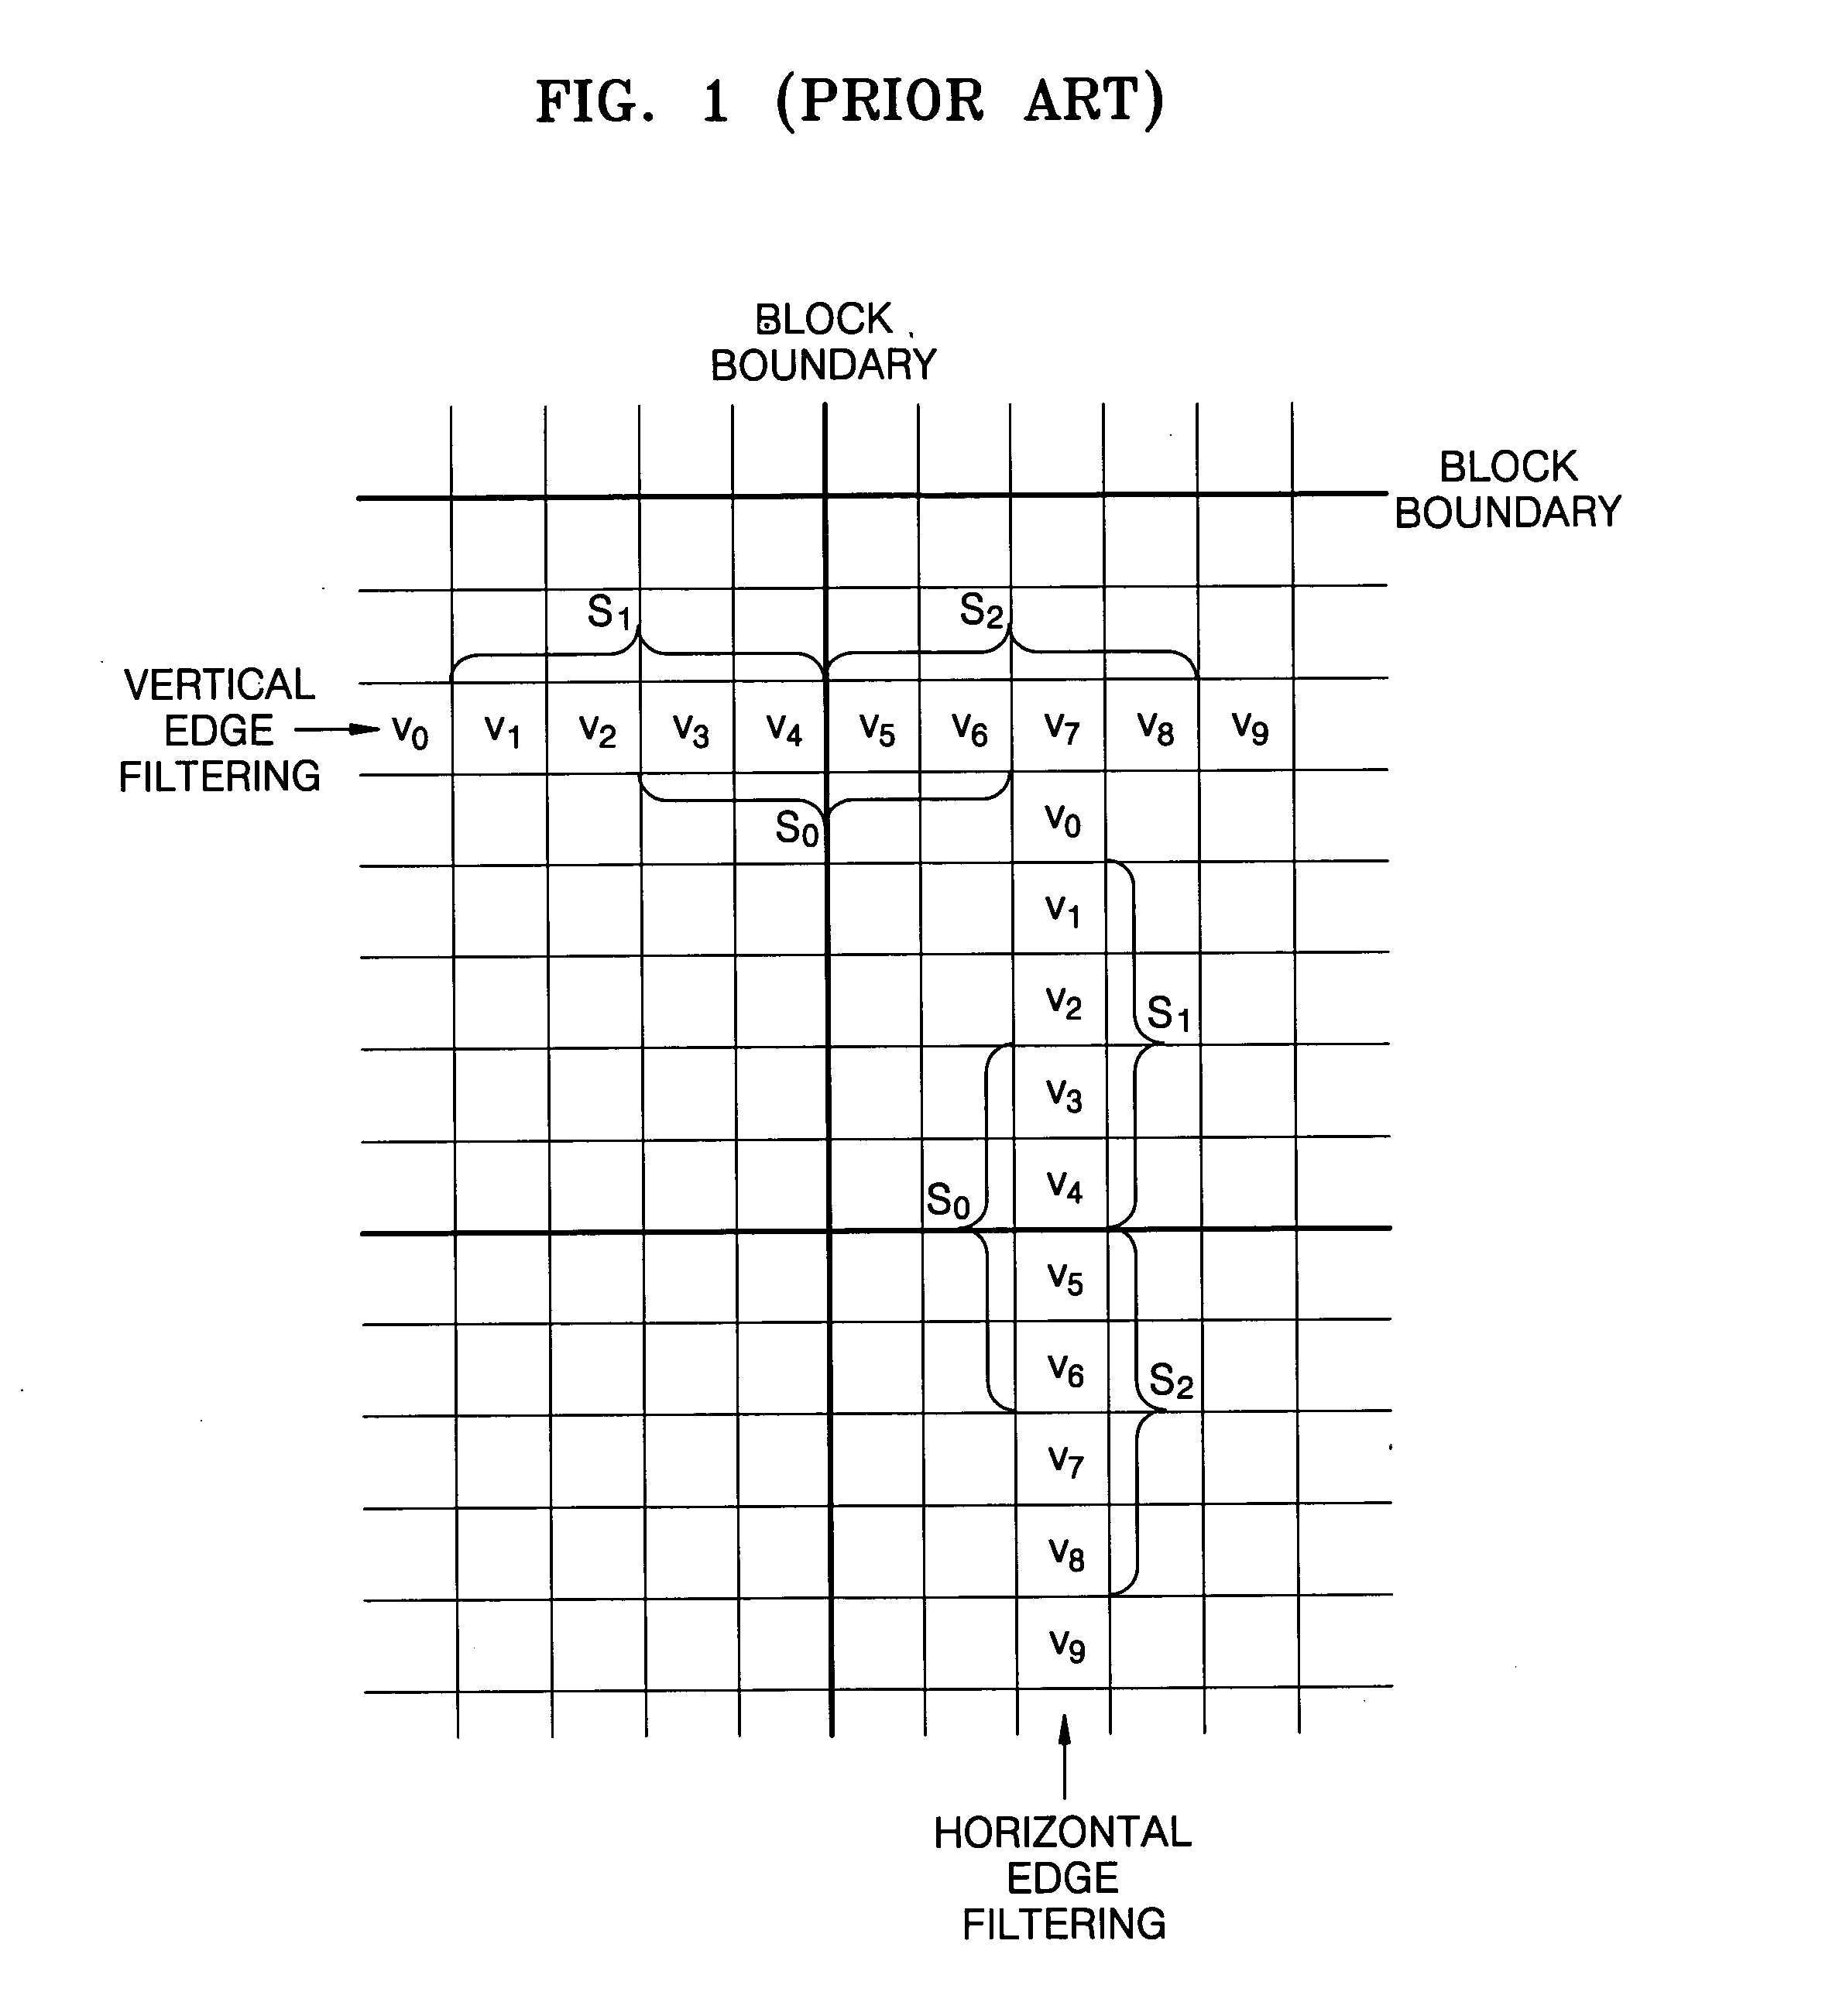 Encoding and decoding apparatus and method for reducing blocking phenomenon and computer-readable recording medium storing program for executing the method